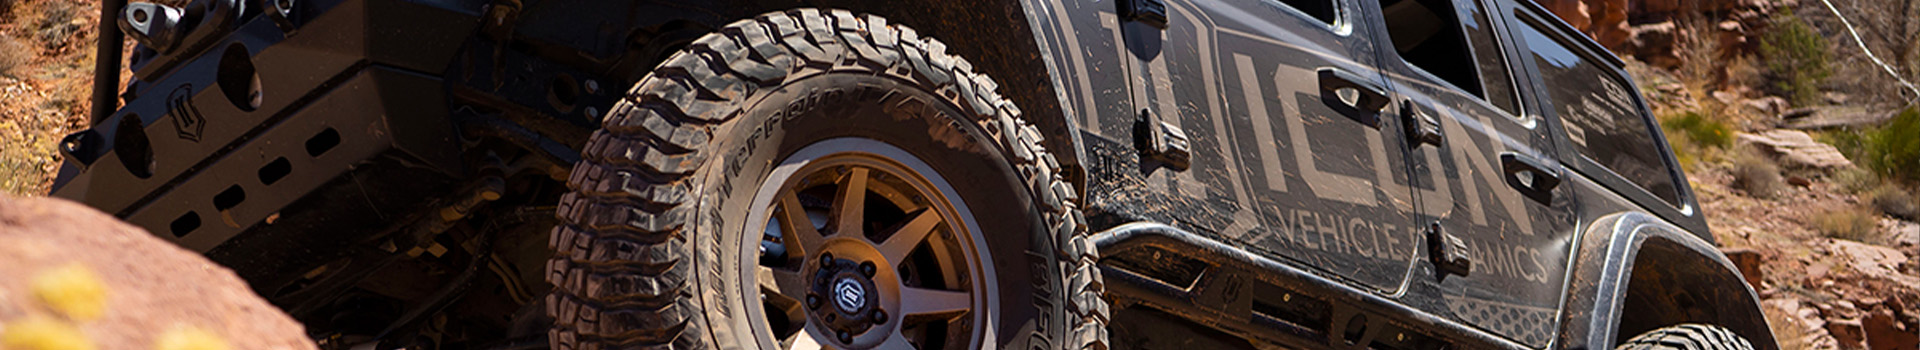 Icon Alloy Wheel in the dirt